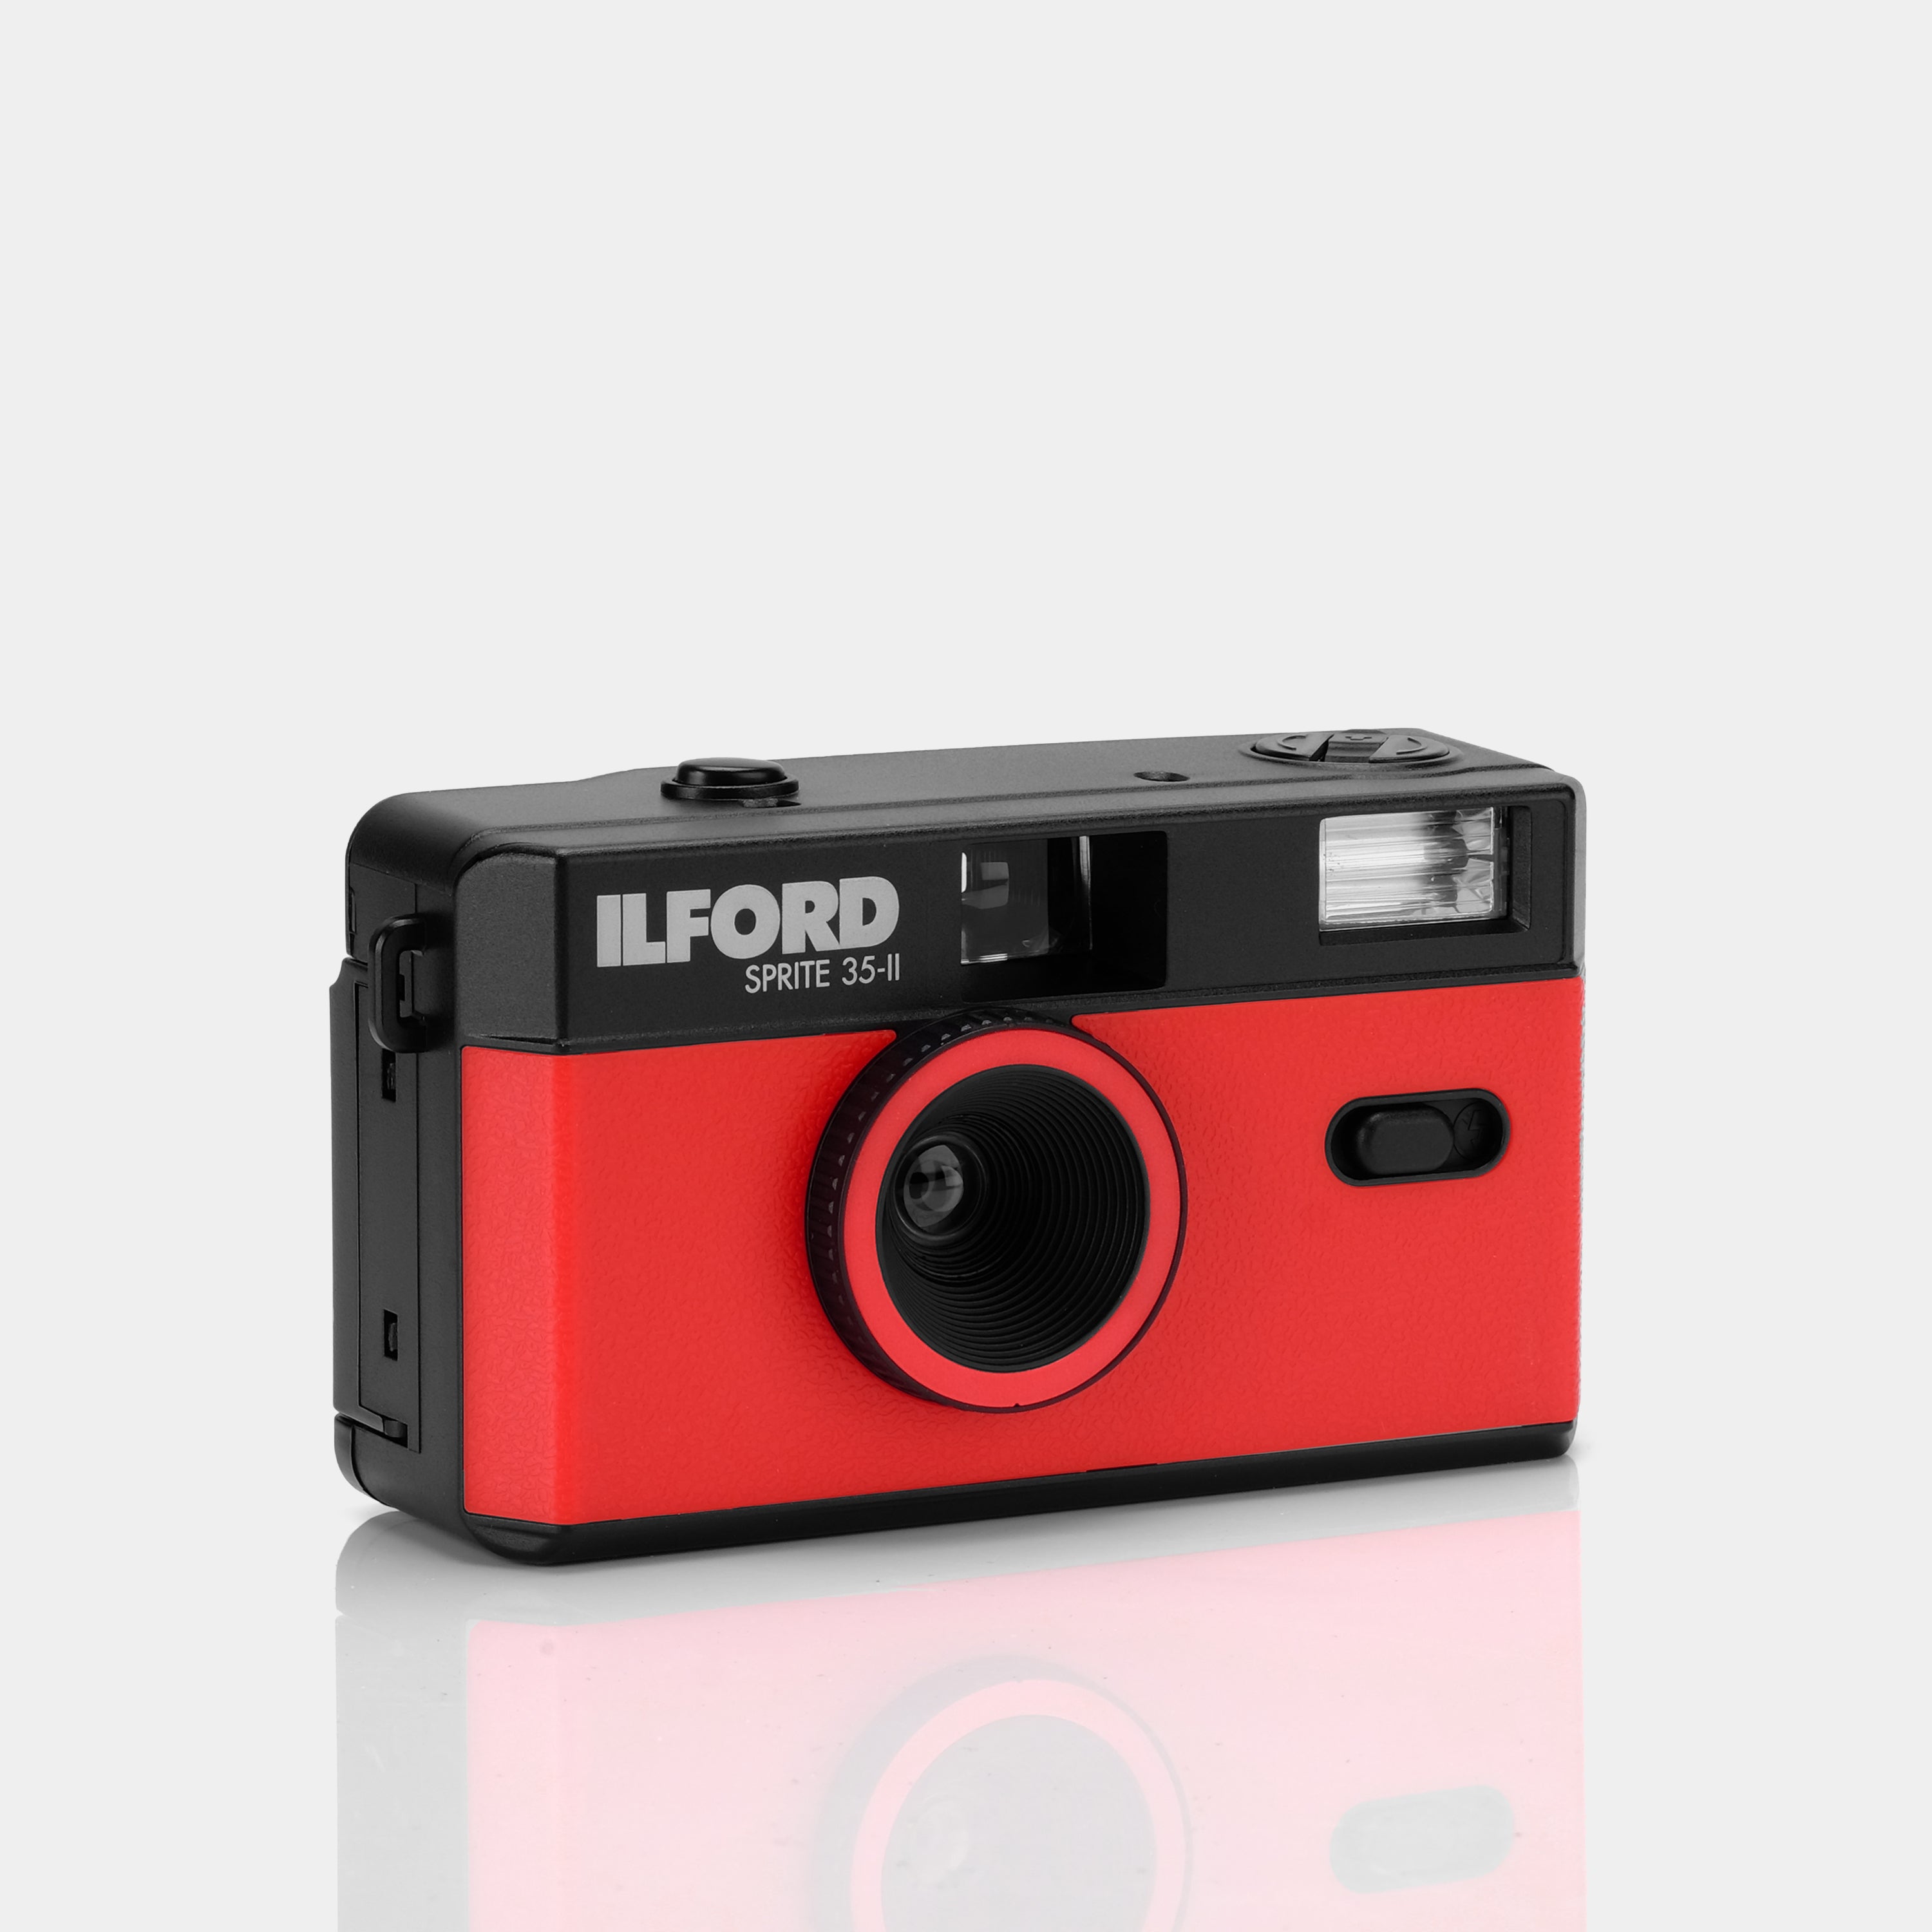 Ilford Sprite 35-II Reusable 35mm Point and Shoot Film Camera - Red & Black